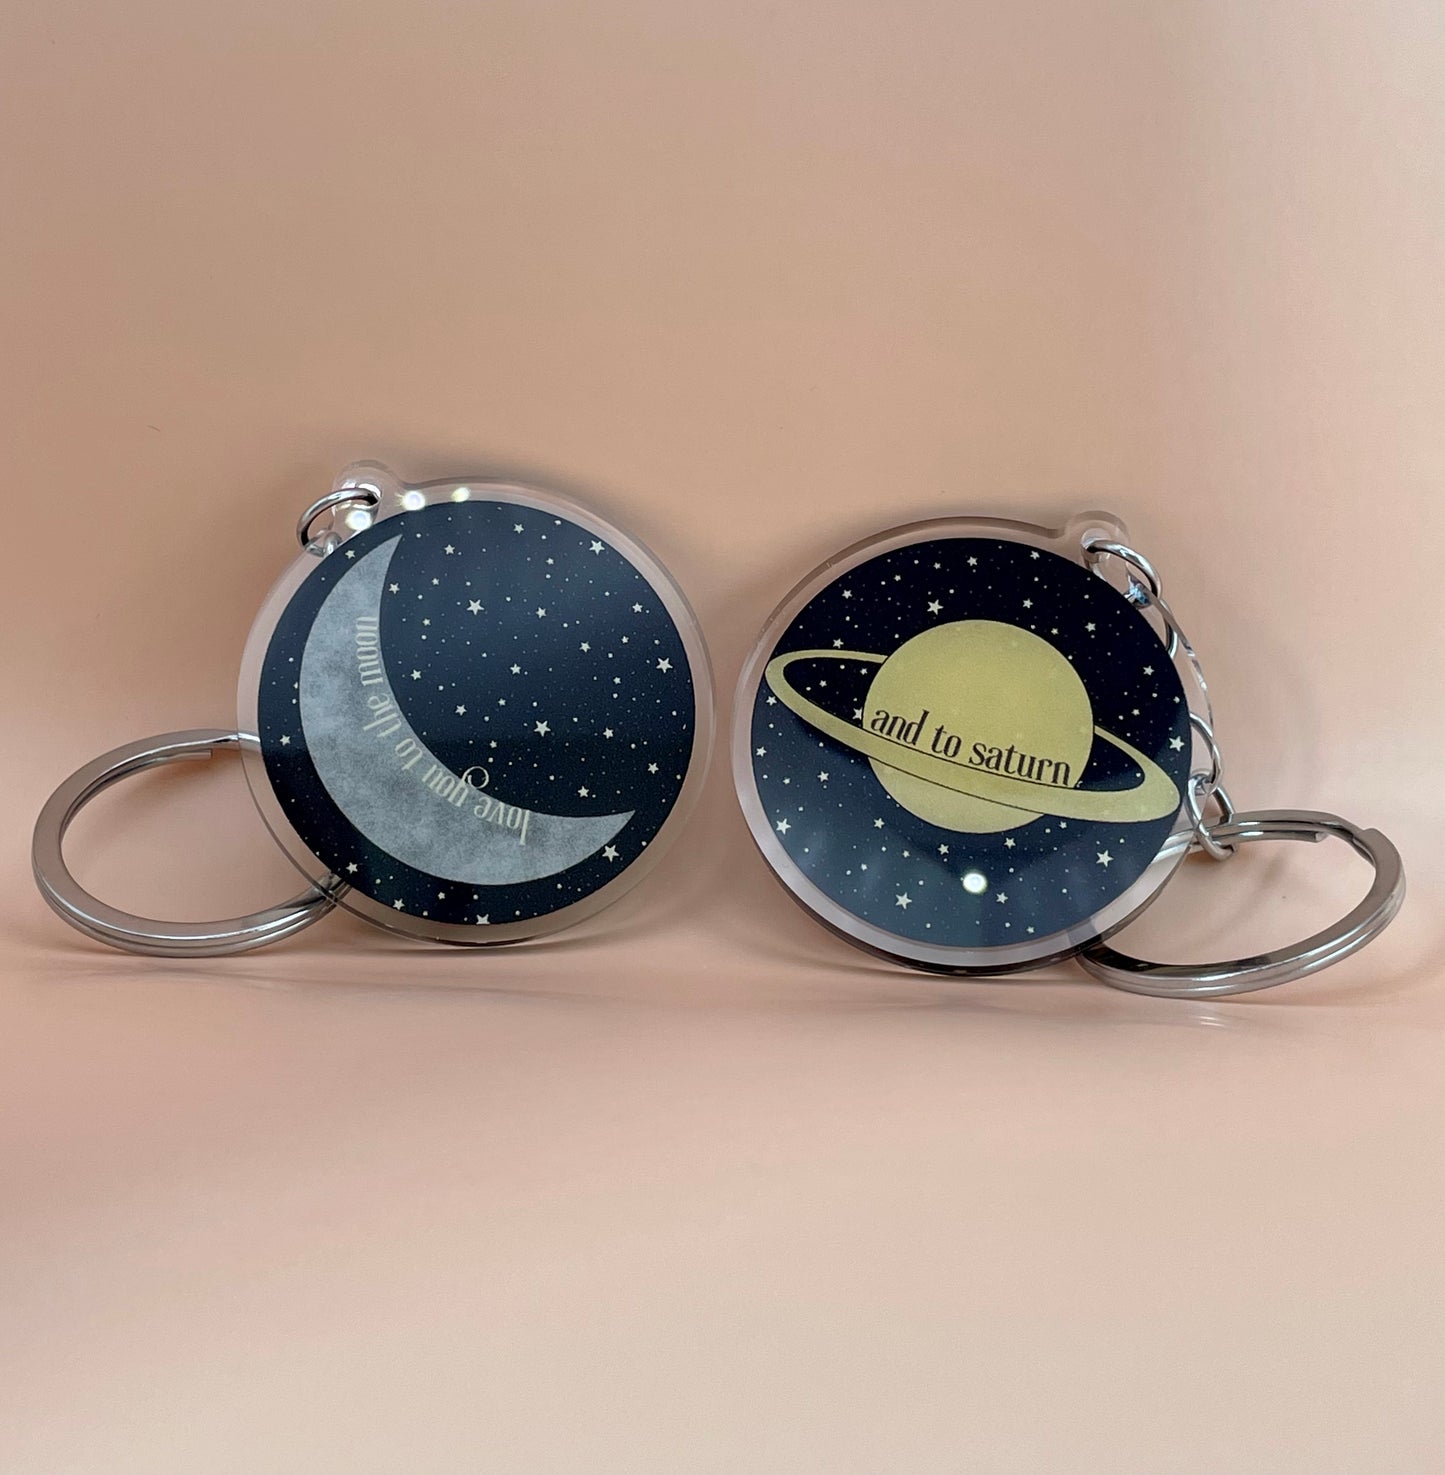 Love You to the Moon and to Saturn Keychain Set | Taylor Swift Keychains